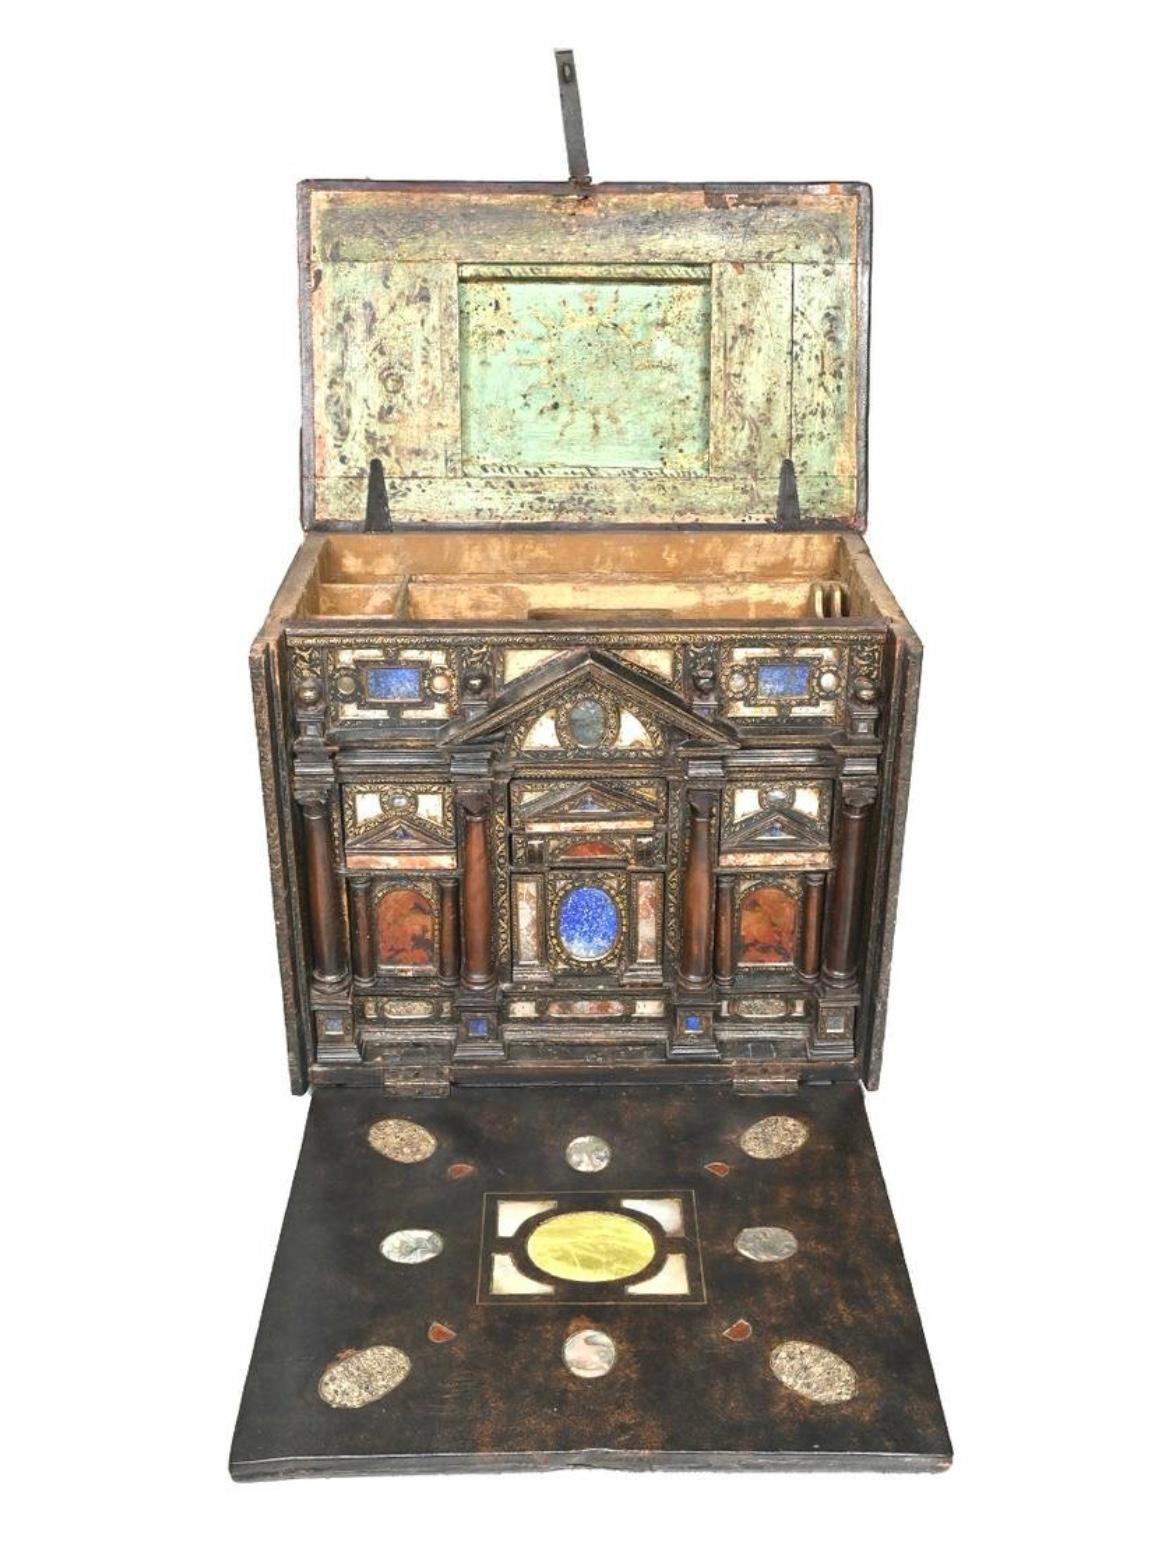 An Italian marble and mother-of-pearl mounted lacquer table cabinet, Venetian late 16th/early 17th century.
Of architectural form centred by a triangular pediment above a niche enclosing two drawers flanked by two marble columns and two further